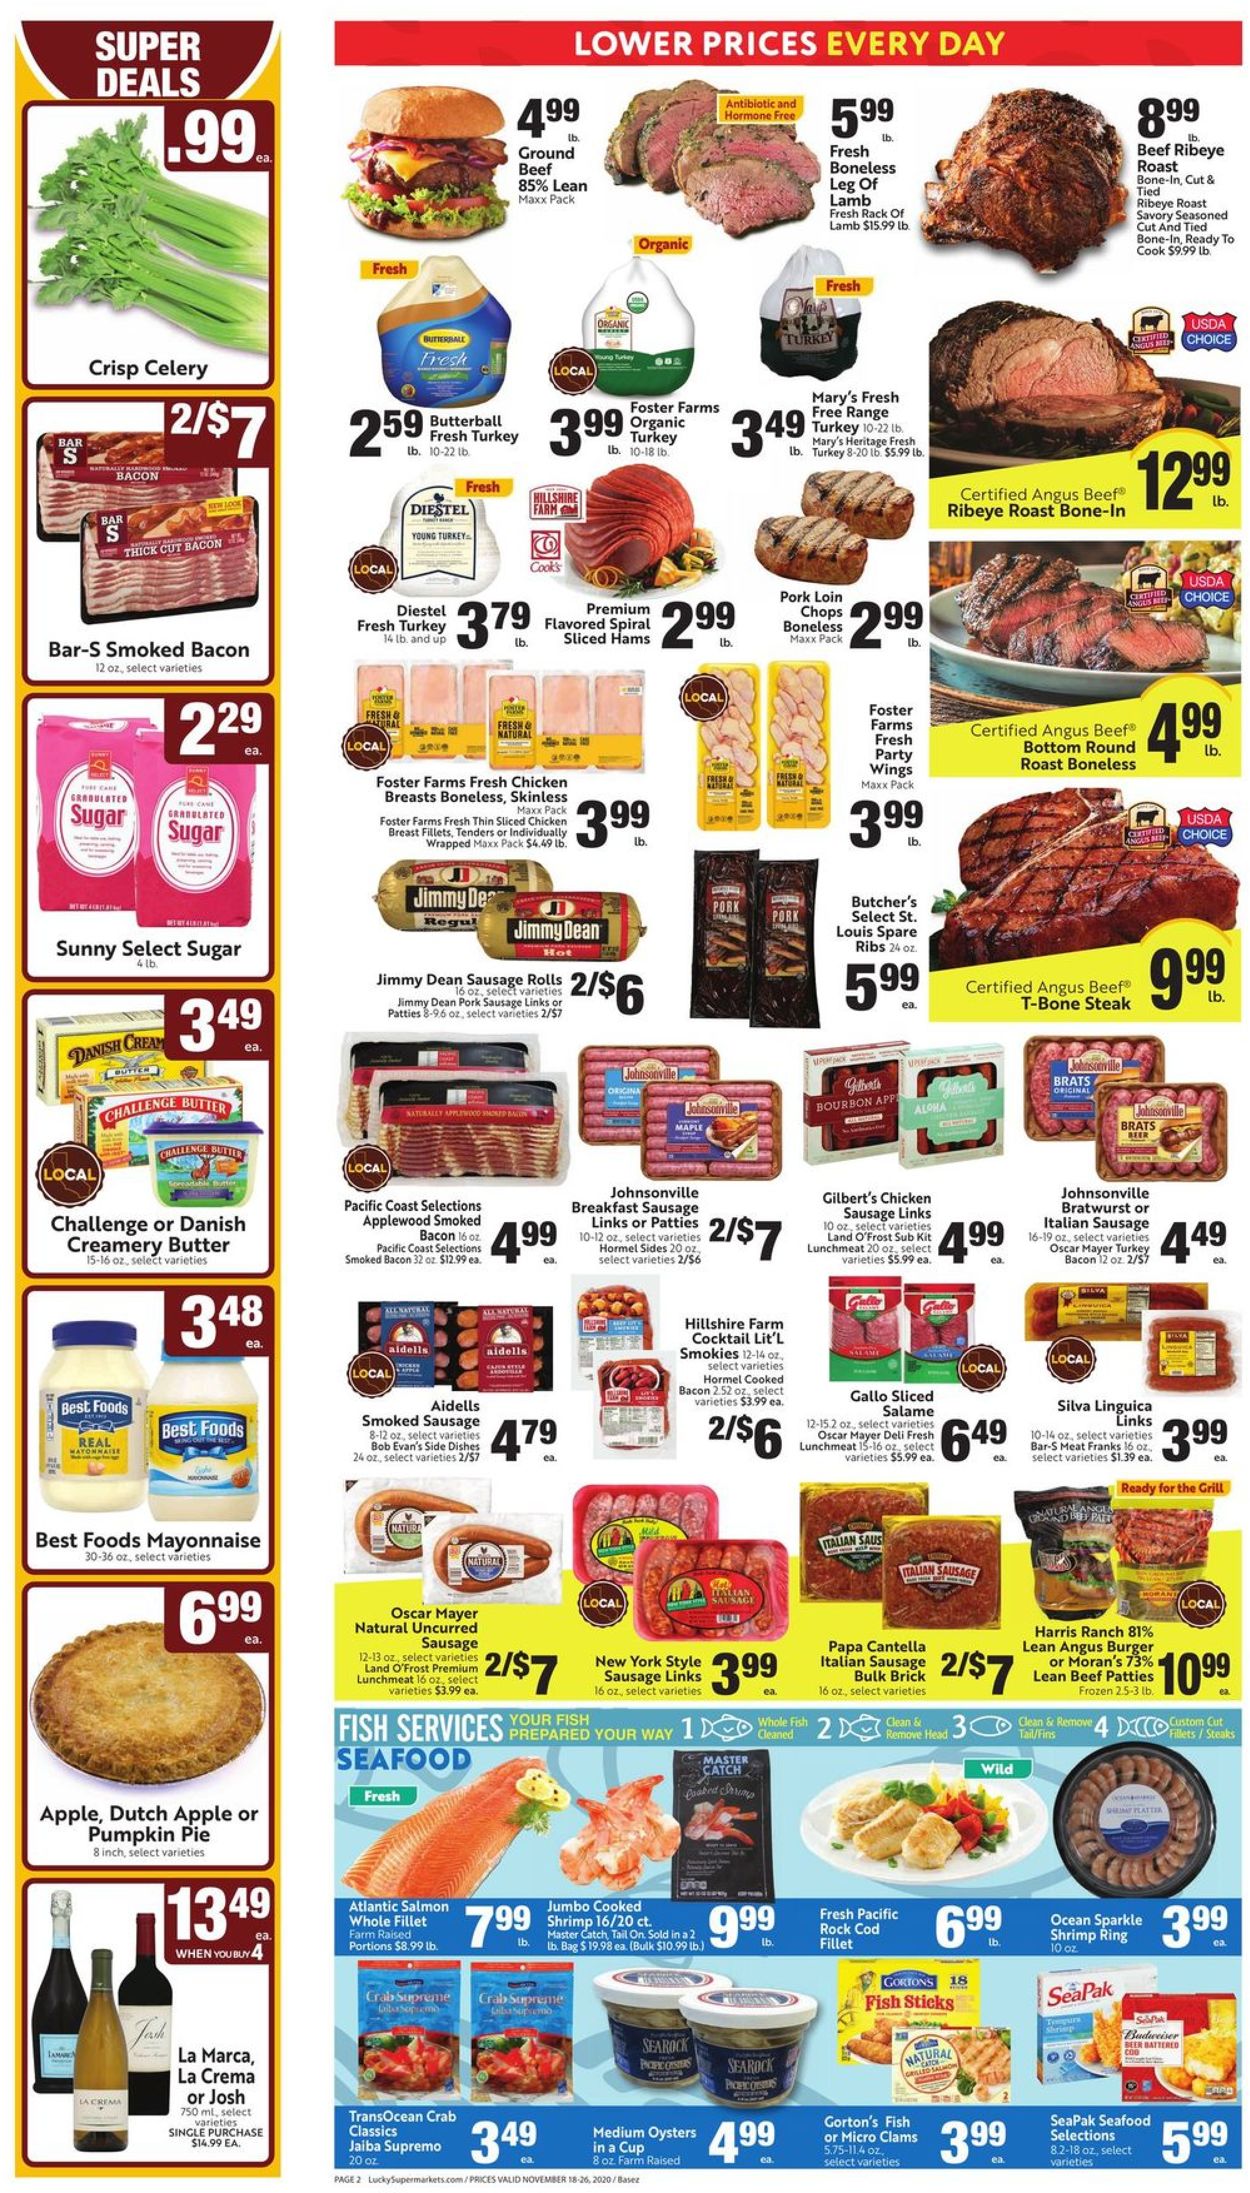 Lucky Supermarkets Thanksgiving ad 2020 Weekly Ad Circular - valid 11/18-11/26/2020 (Page 2)